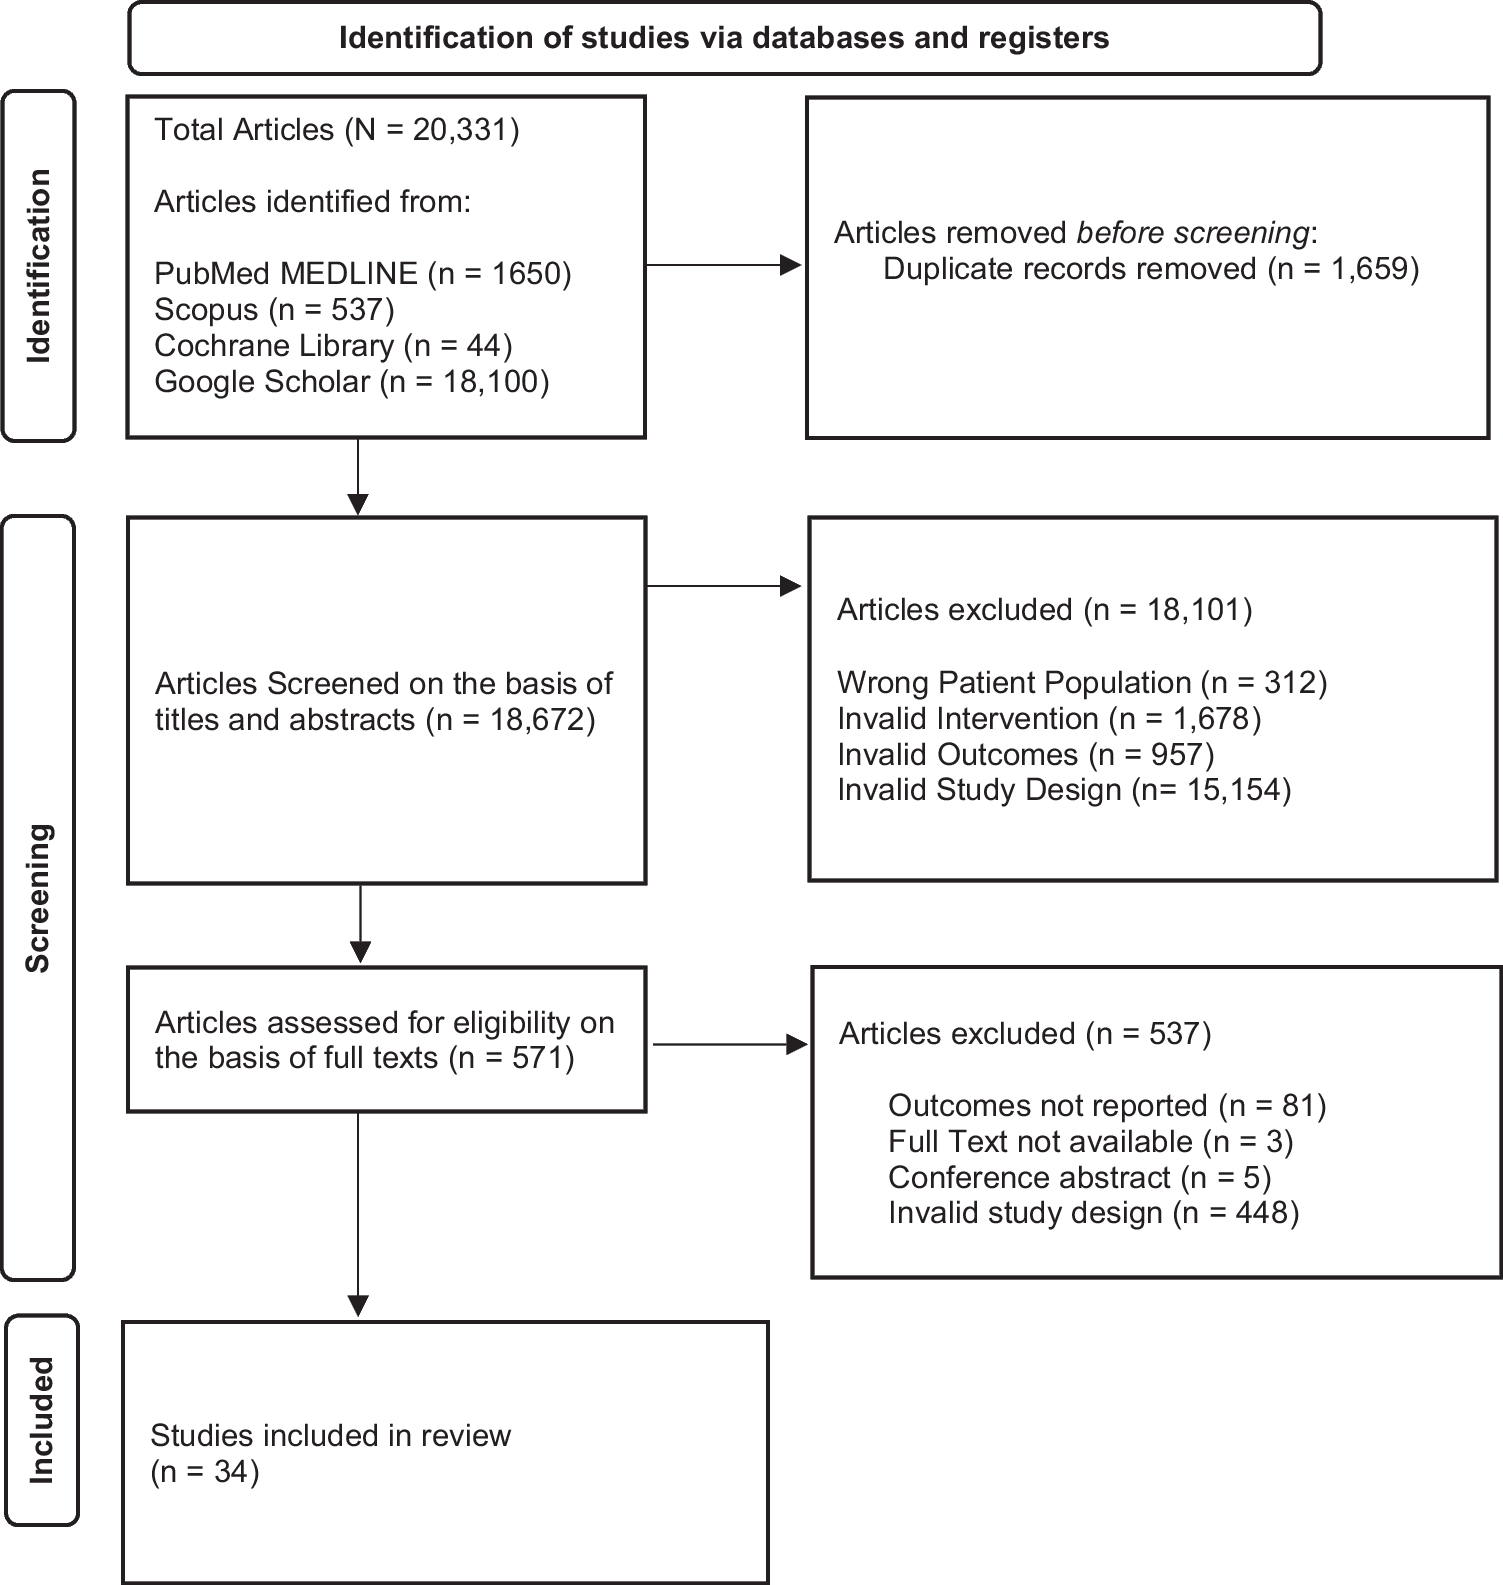 Efficacy of Cisplatin-Containing Chemotherapy Regimens in Patients of Pancreatic Ductal Adenocarcinoma: A Systematic Review and Meta-analysis